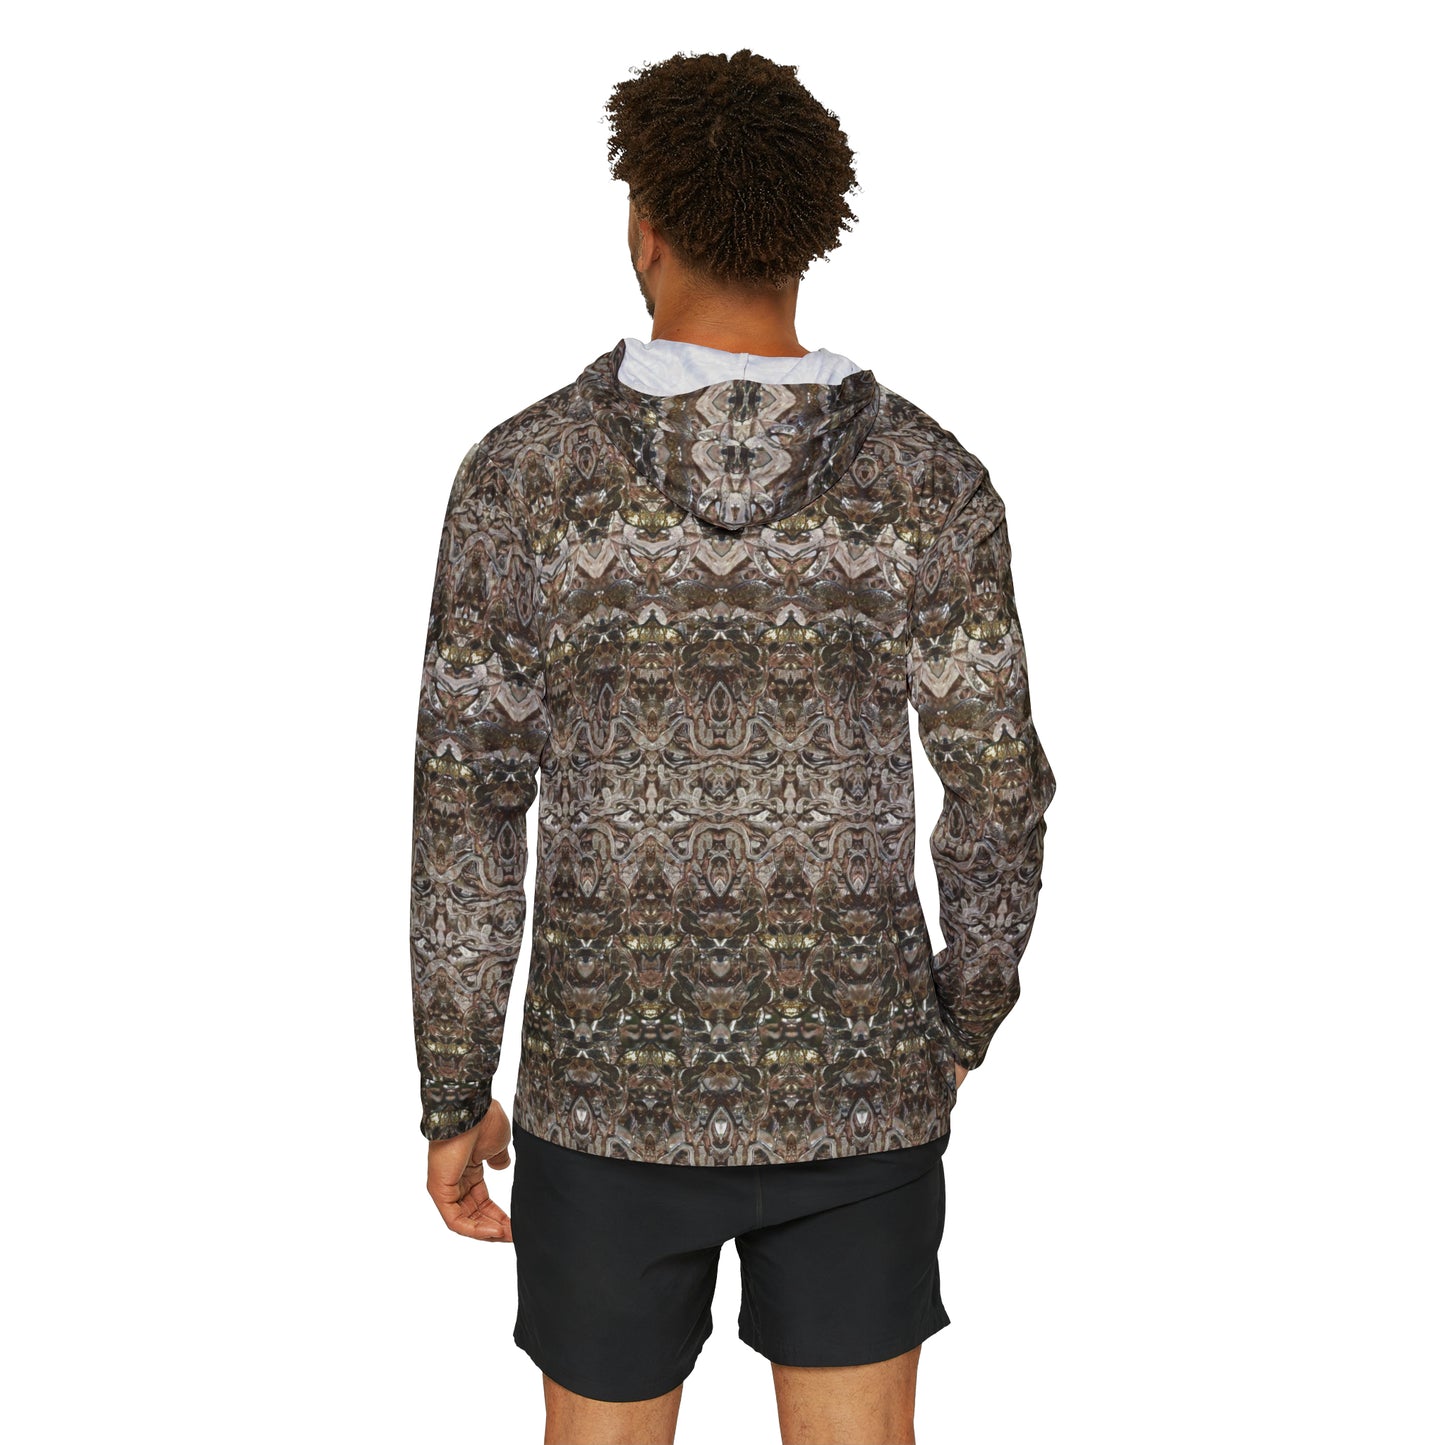 Athletic Activewear Hoodie (His/They)(Samhain Dream Thaw 1 of 15 Unus ex Quindecim) RJSTH@w2023 RJS